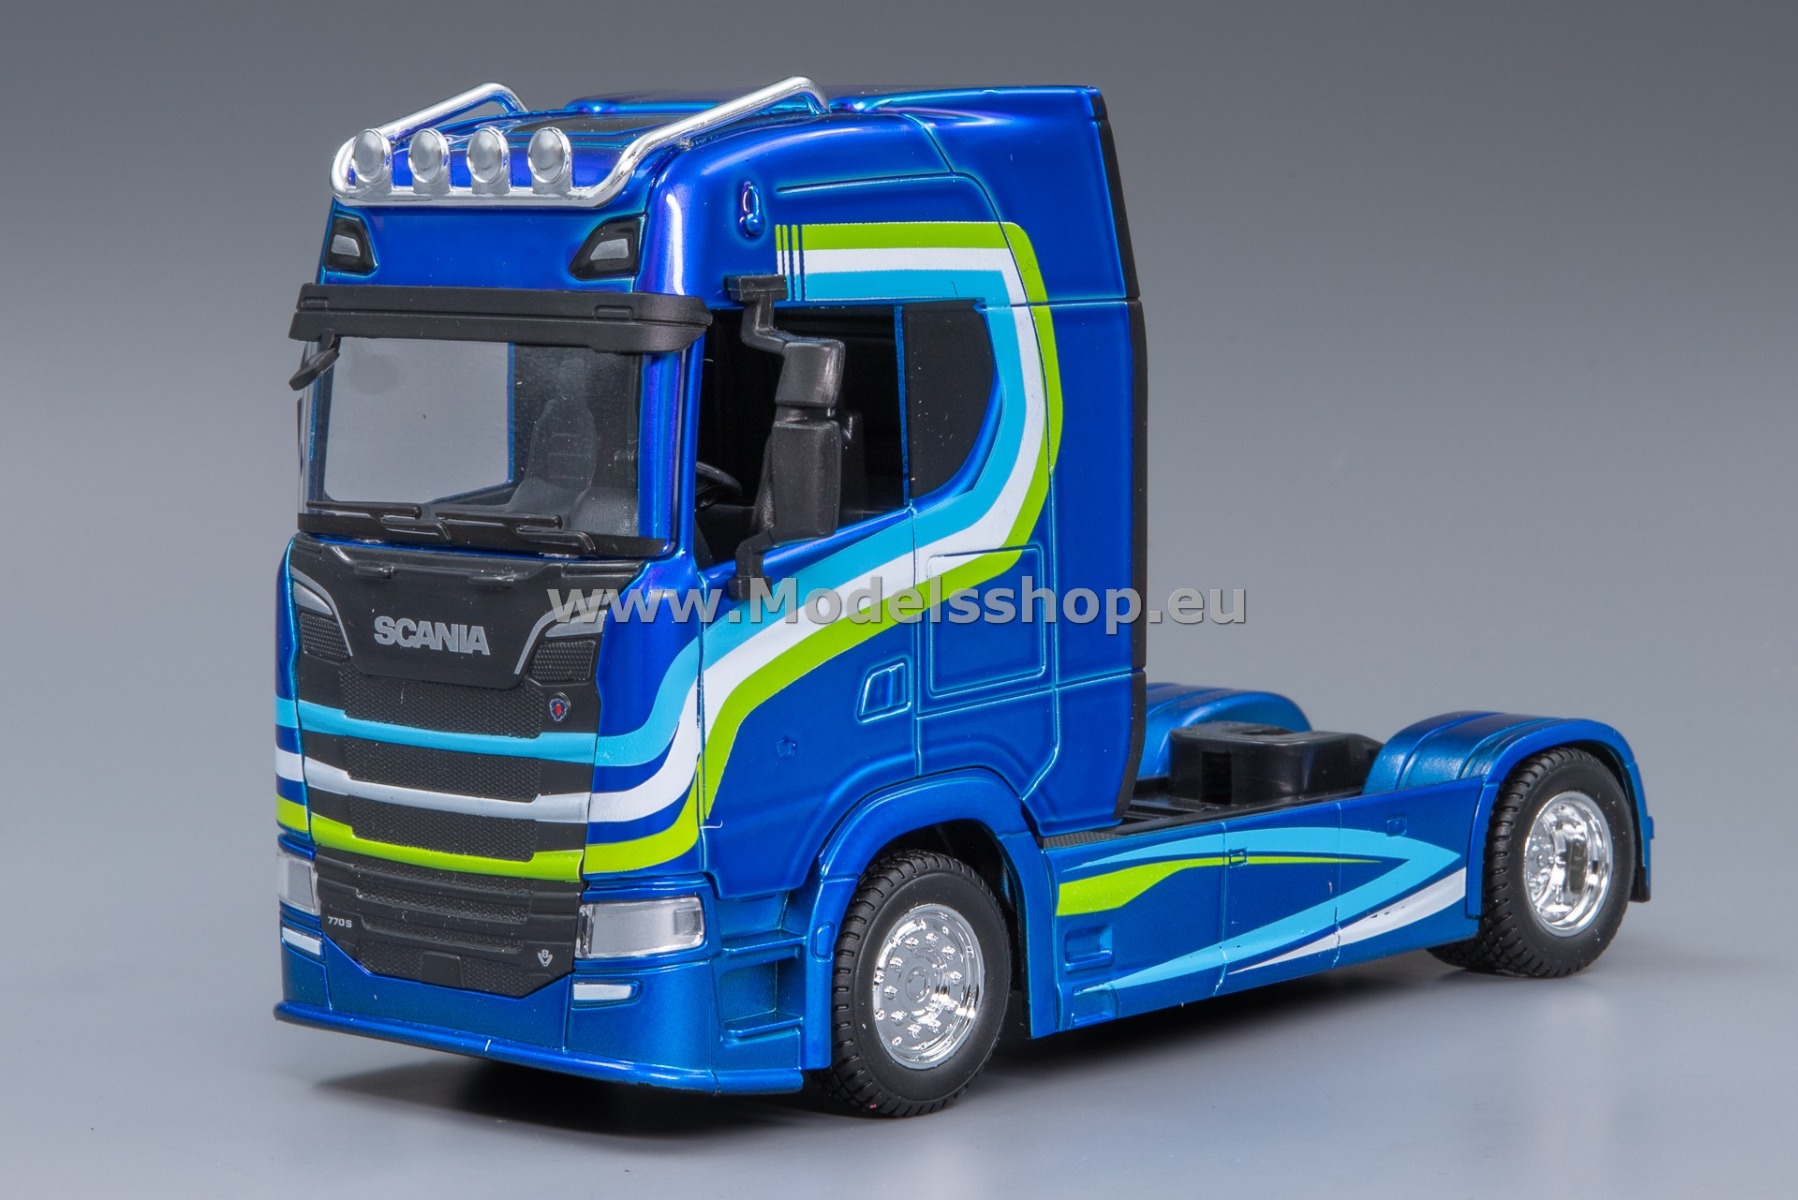 Scania S730 Highline tracor truck /blue metallic - decorated/